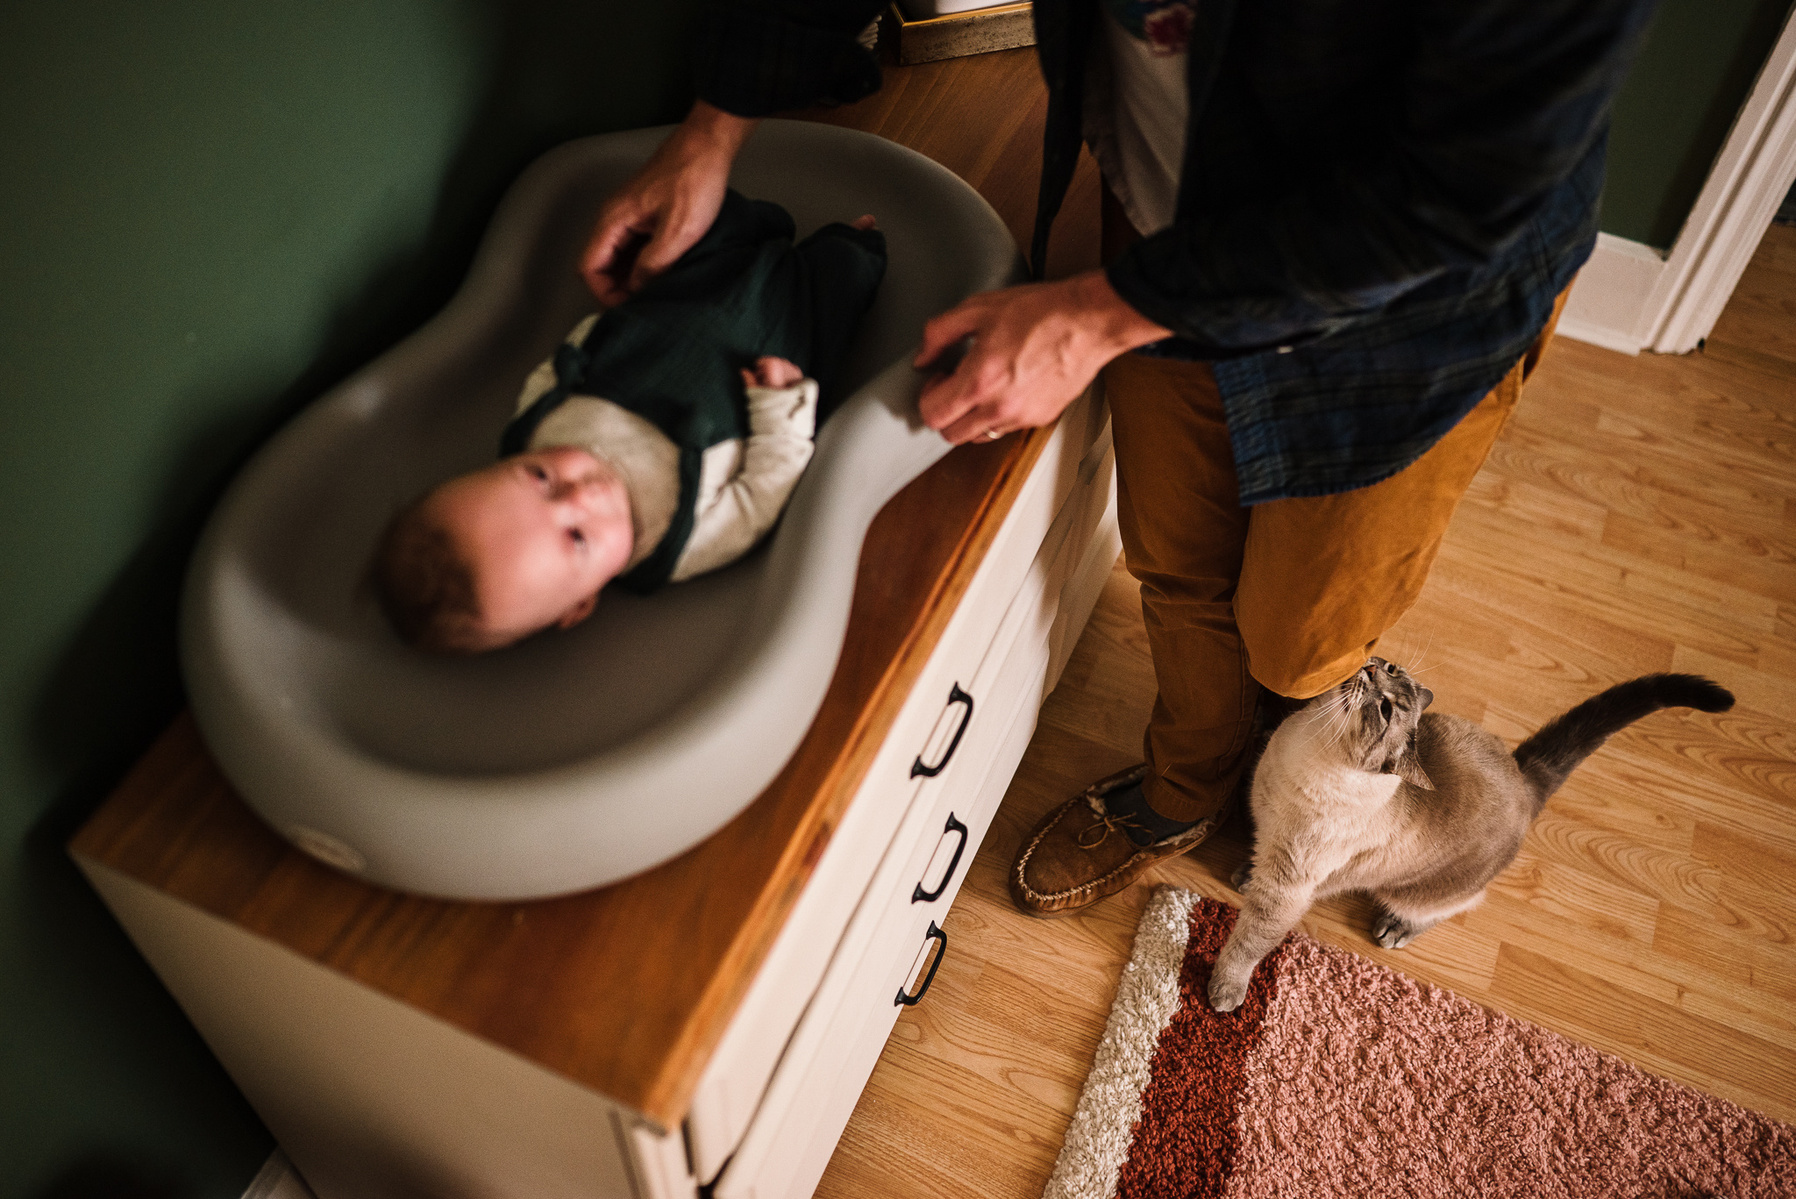 A newborn twin lays on a changing table while a cat rubs on her father's legs